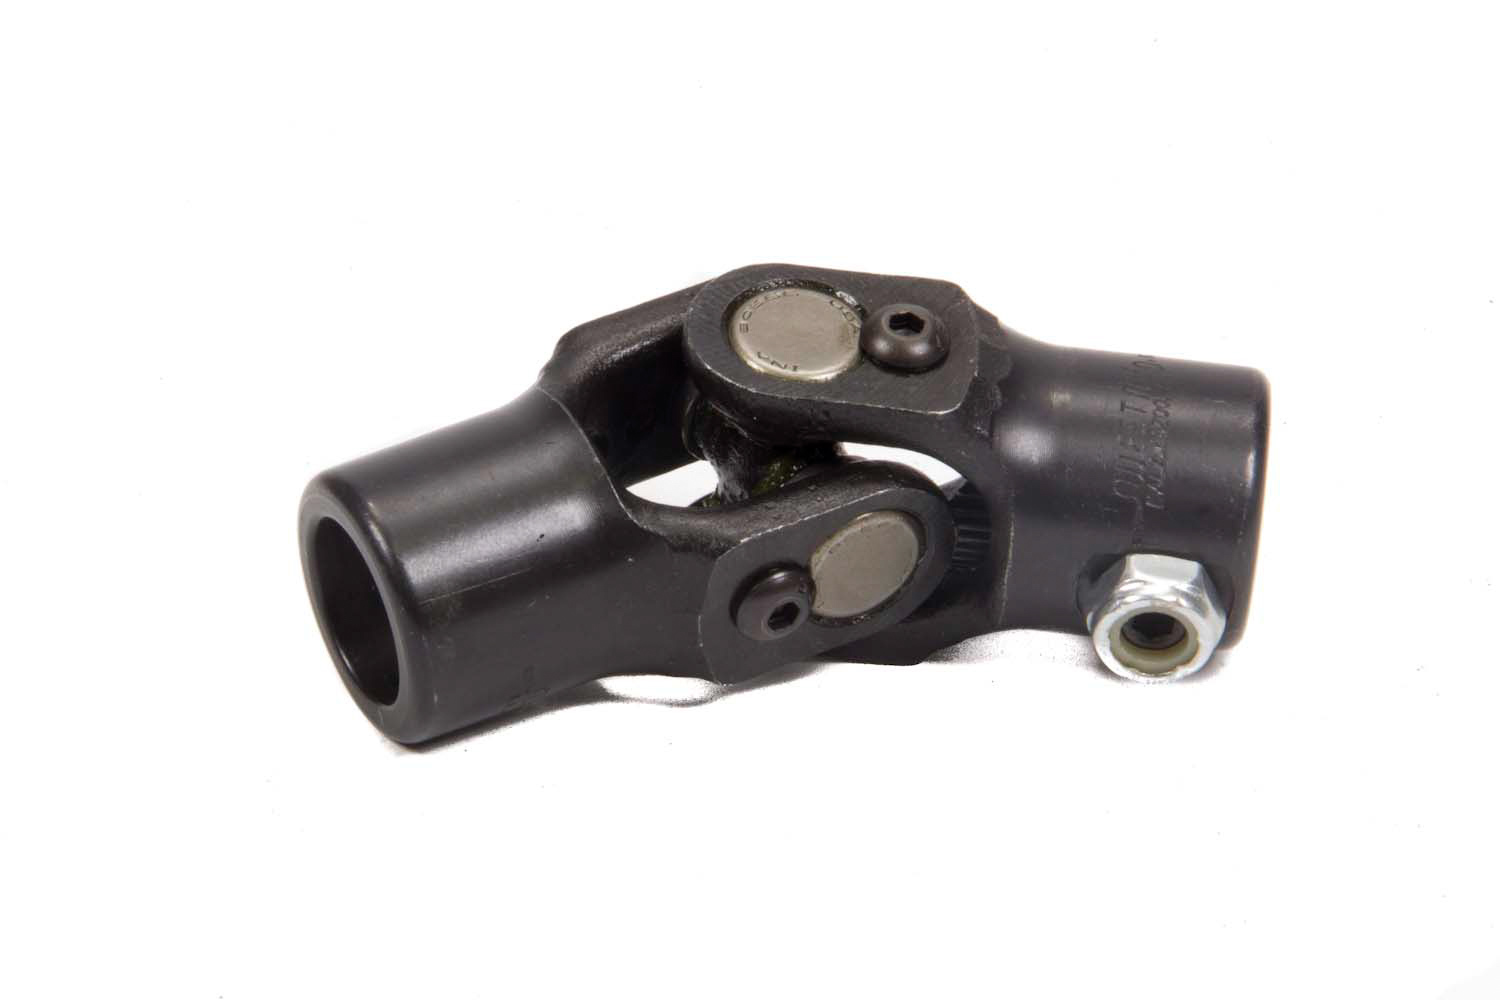 Steering Universal Joint - Single Joint - 3/4 in Smooth Bore to 3/4 in 30 Spline - Steel - Black Paint - Each